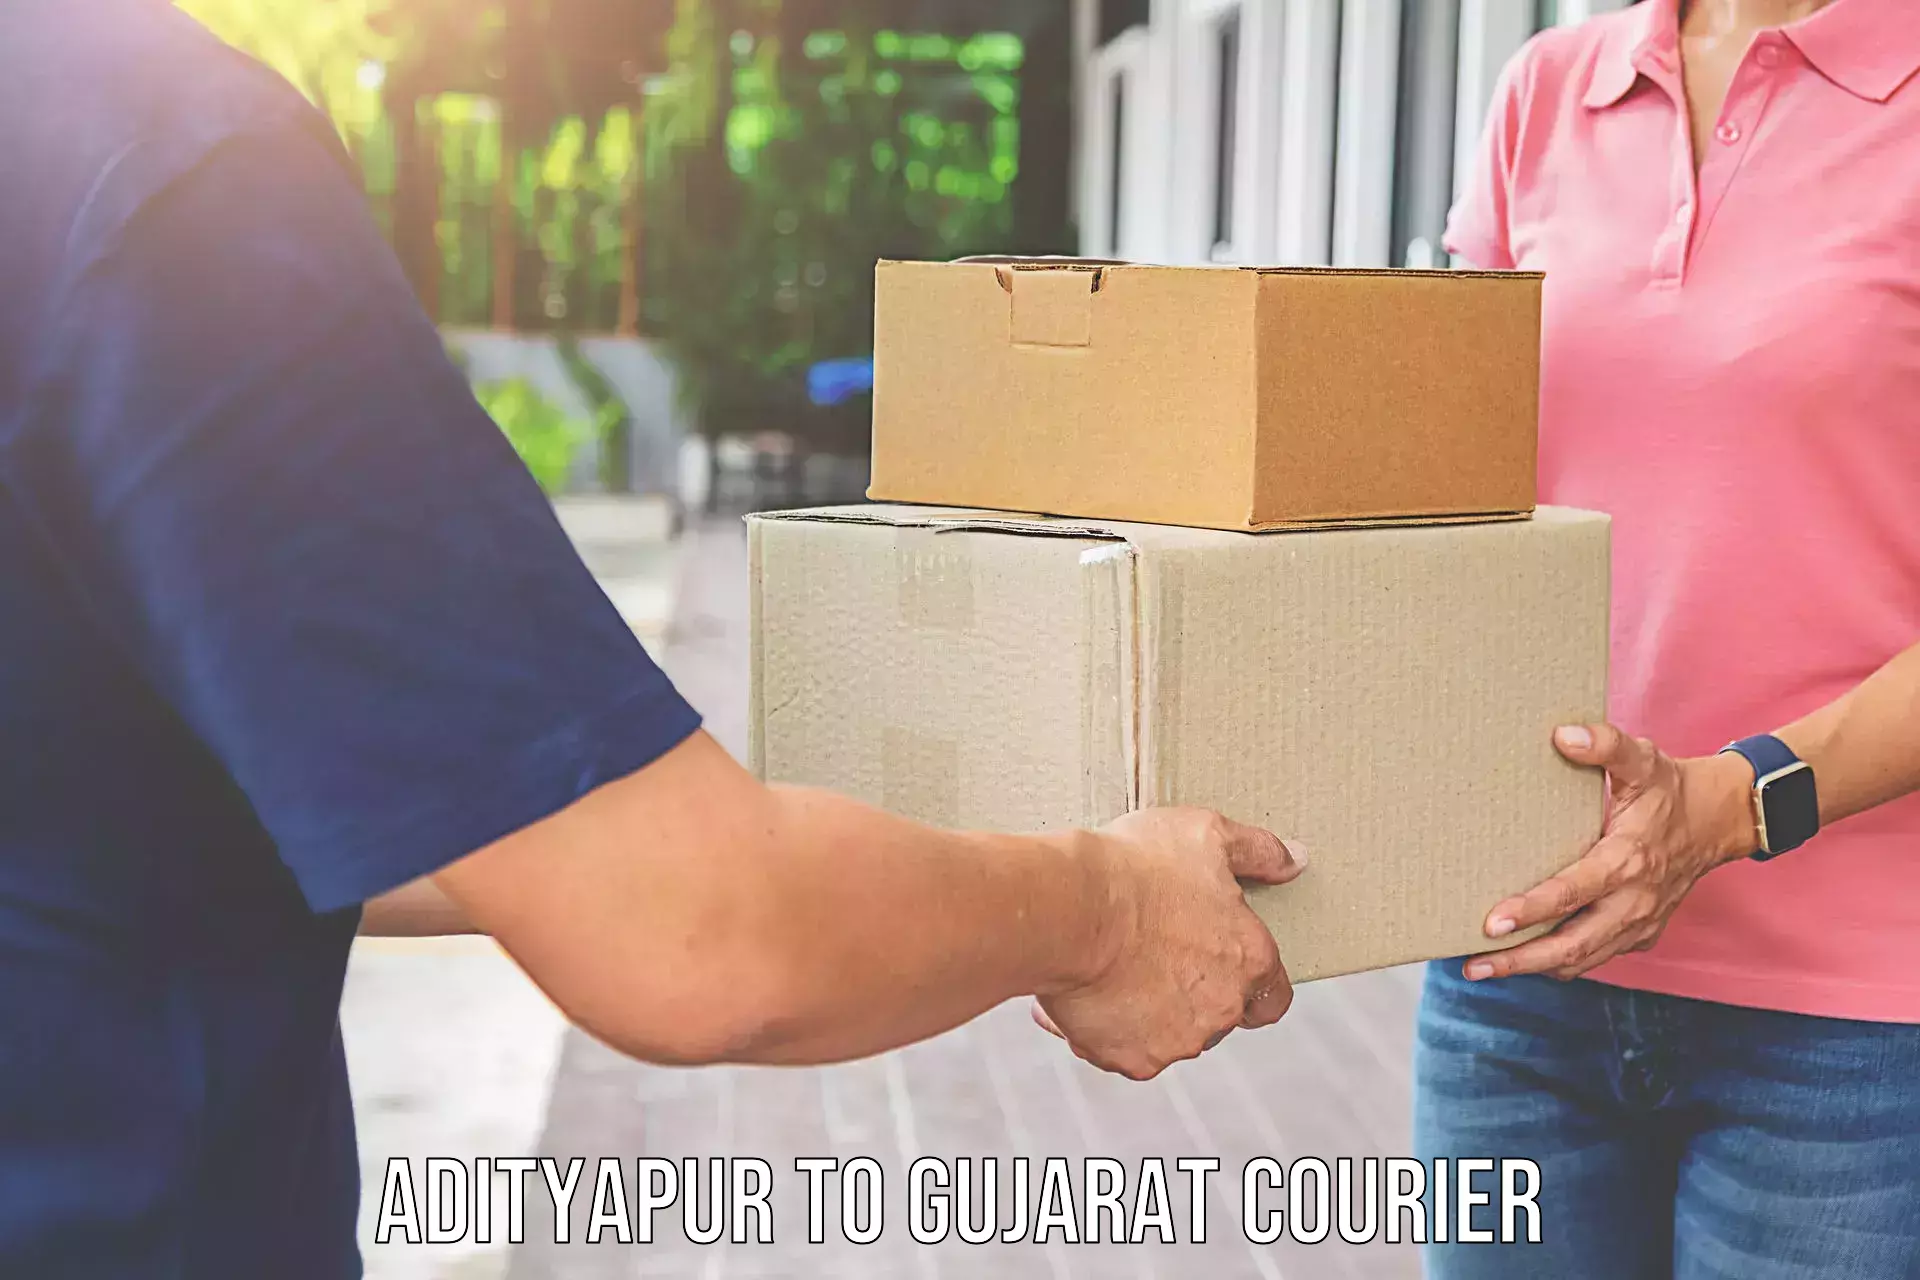 Moving and packing experts Adityapur to Anand Agricultural University